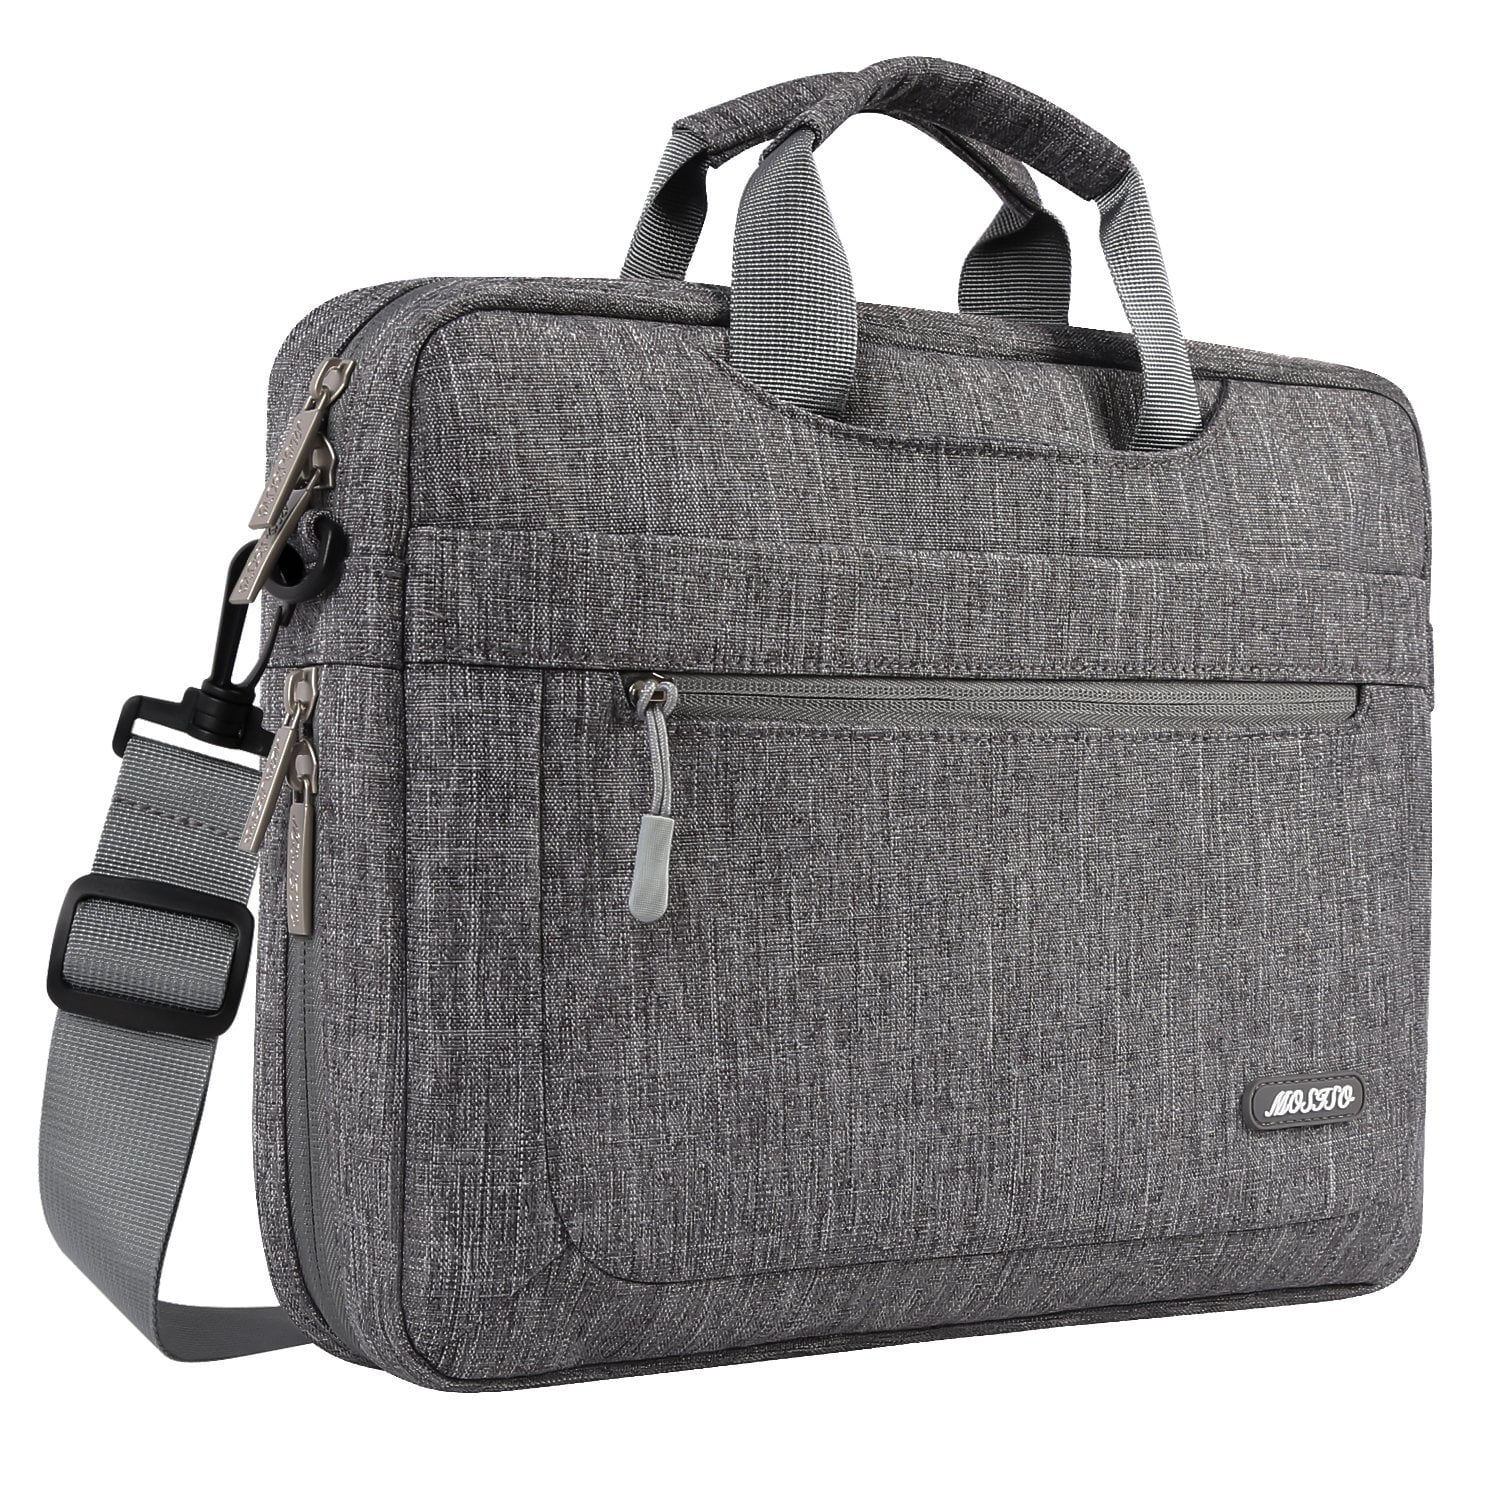 15-15.6 inch Notebook Polyester Briefcase Sleeve with Front Storage Pockets Gray MOSISO Laptop Shoulder Bag Compatible with MacBook Pro 16 inch A2141/Pro Retina A1398